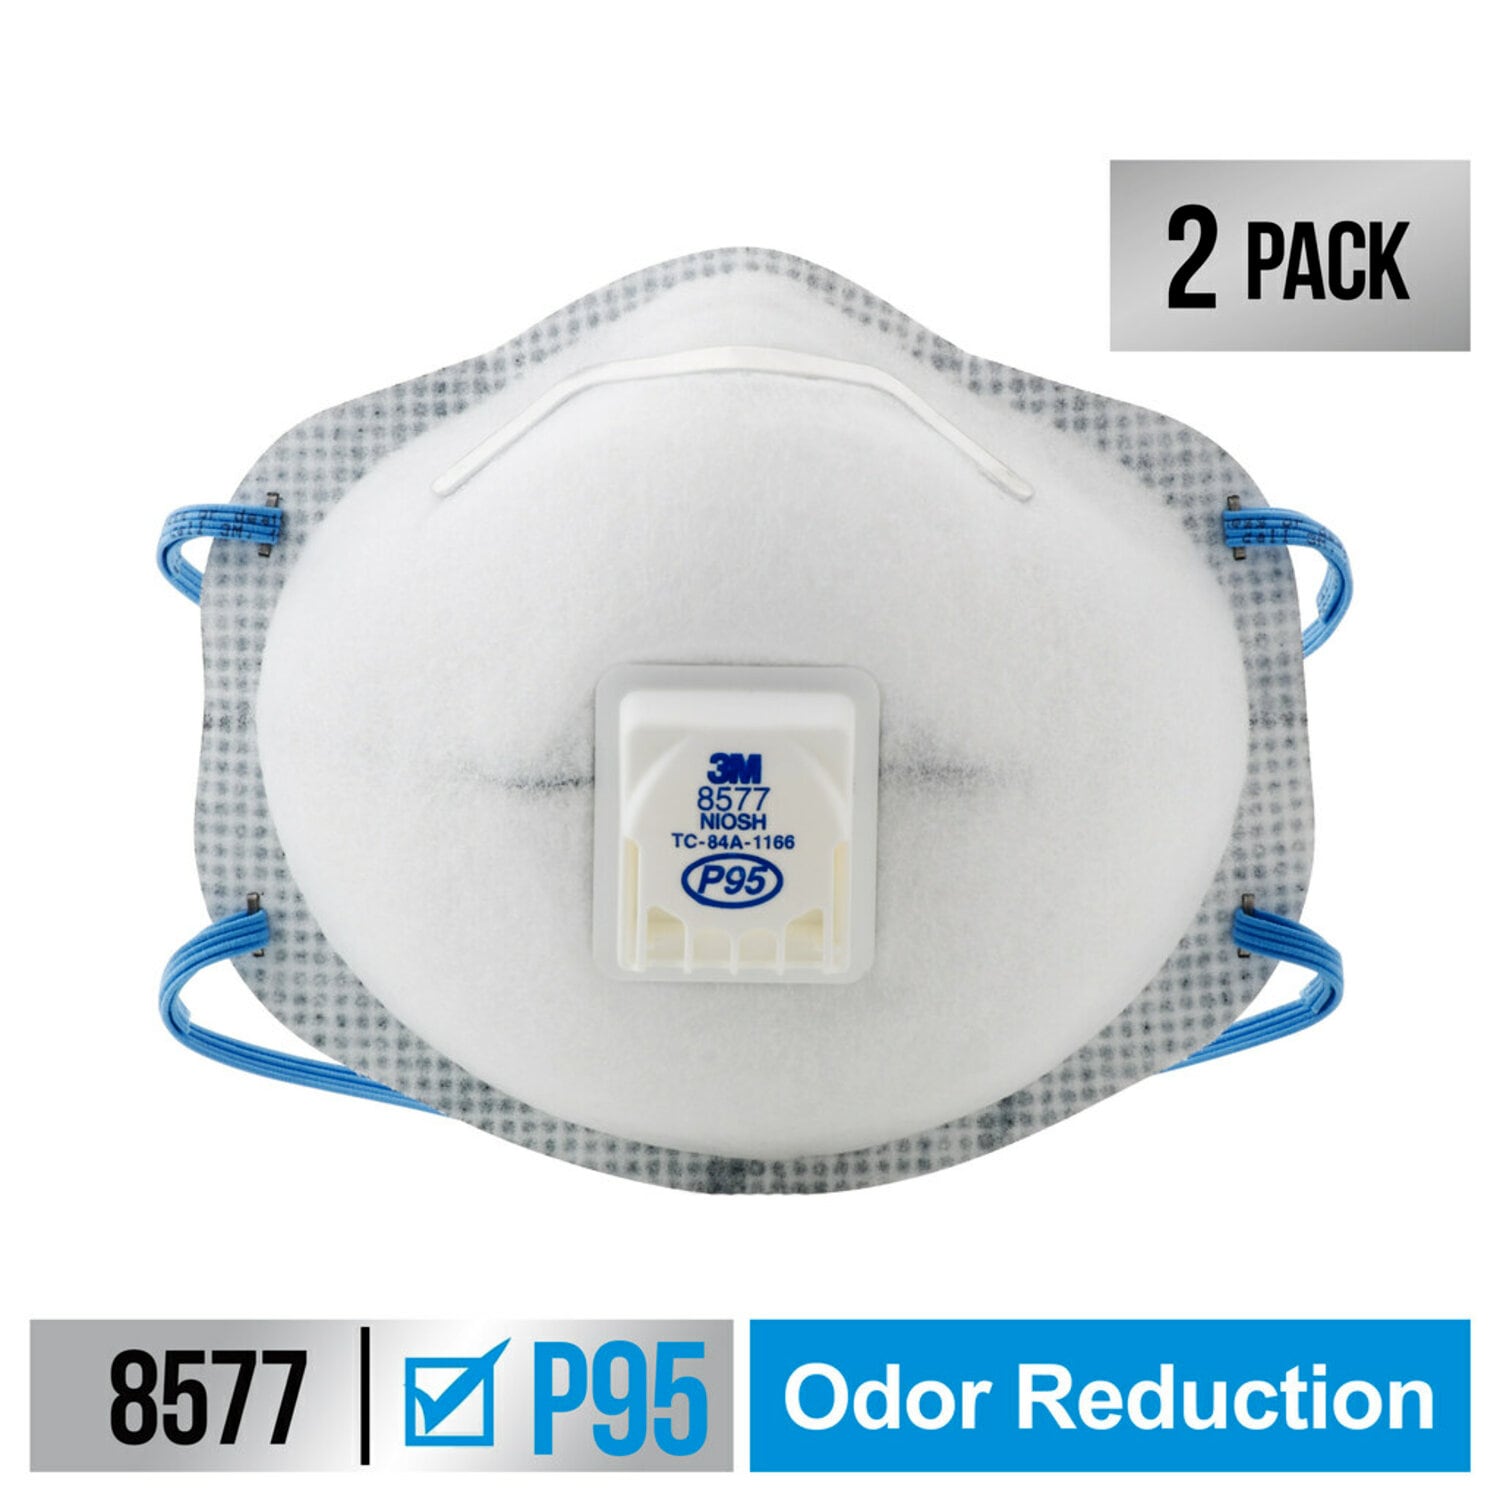 7100189894 - 3M Chemical Odor Valved Respirator, 8577C2-DC-PS, 2 eaches/pack, 6
packs/case